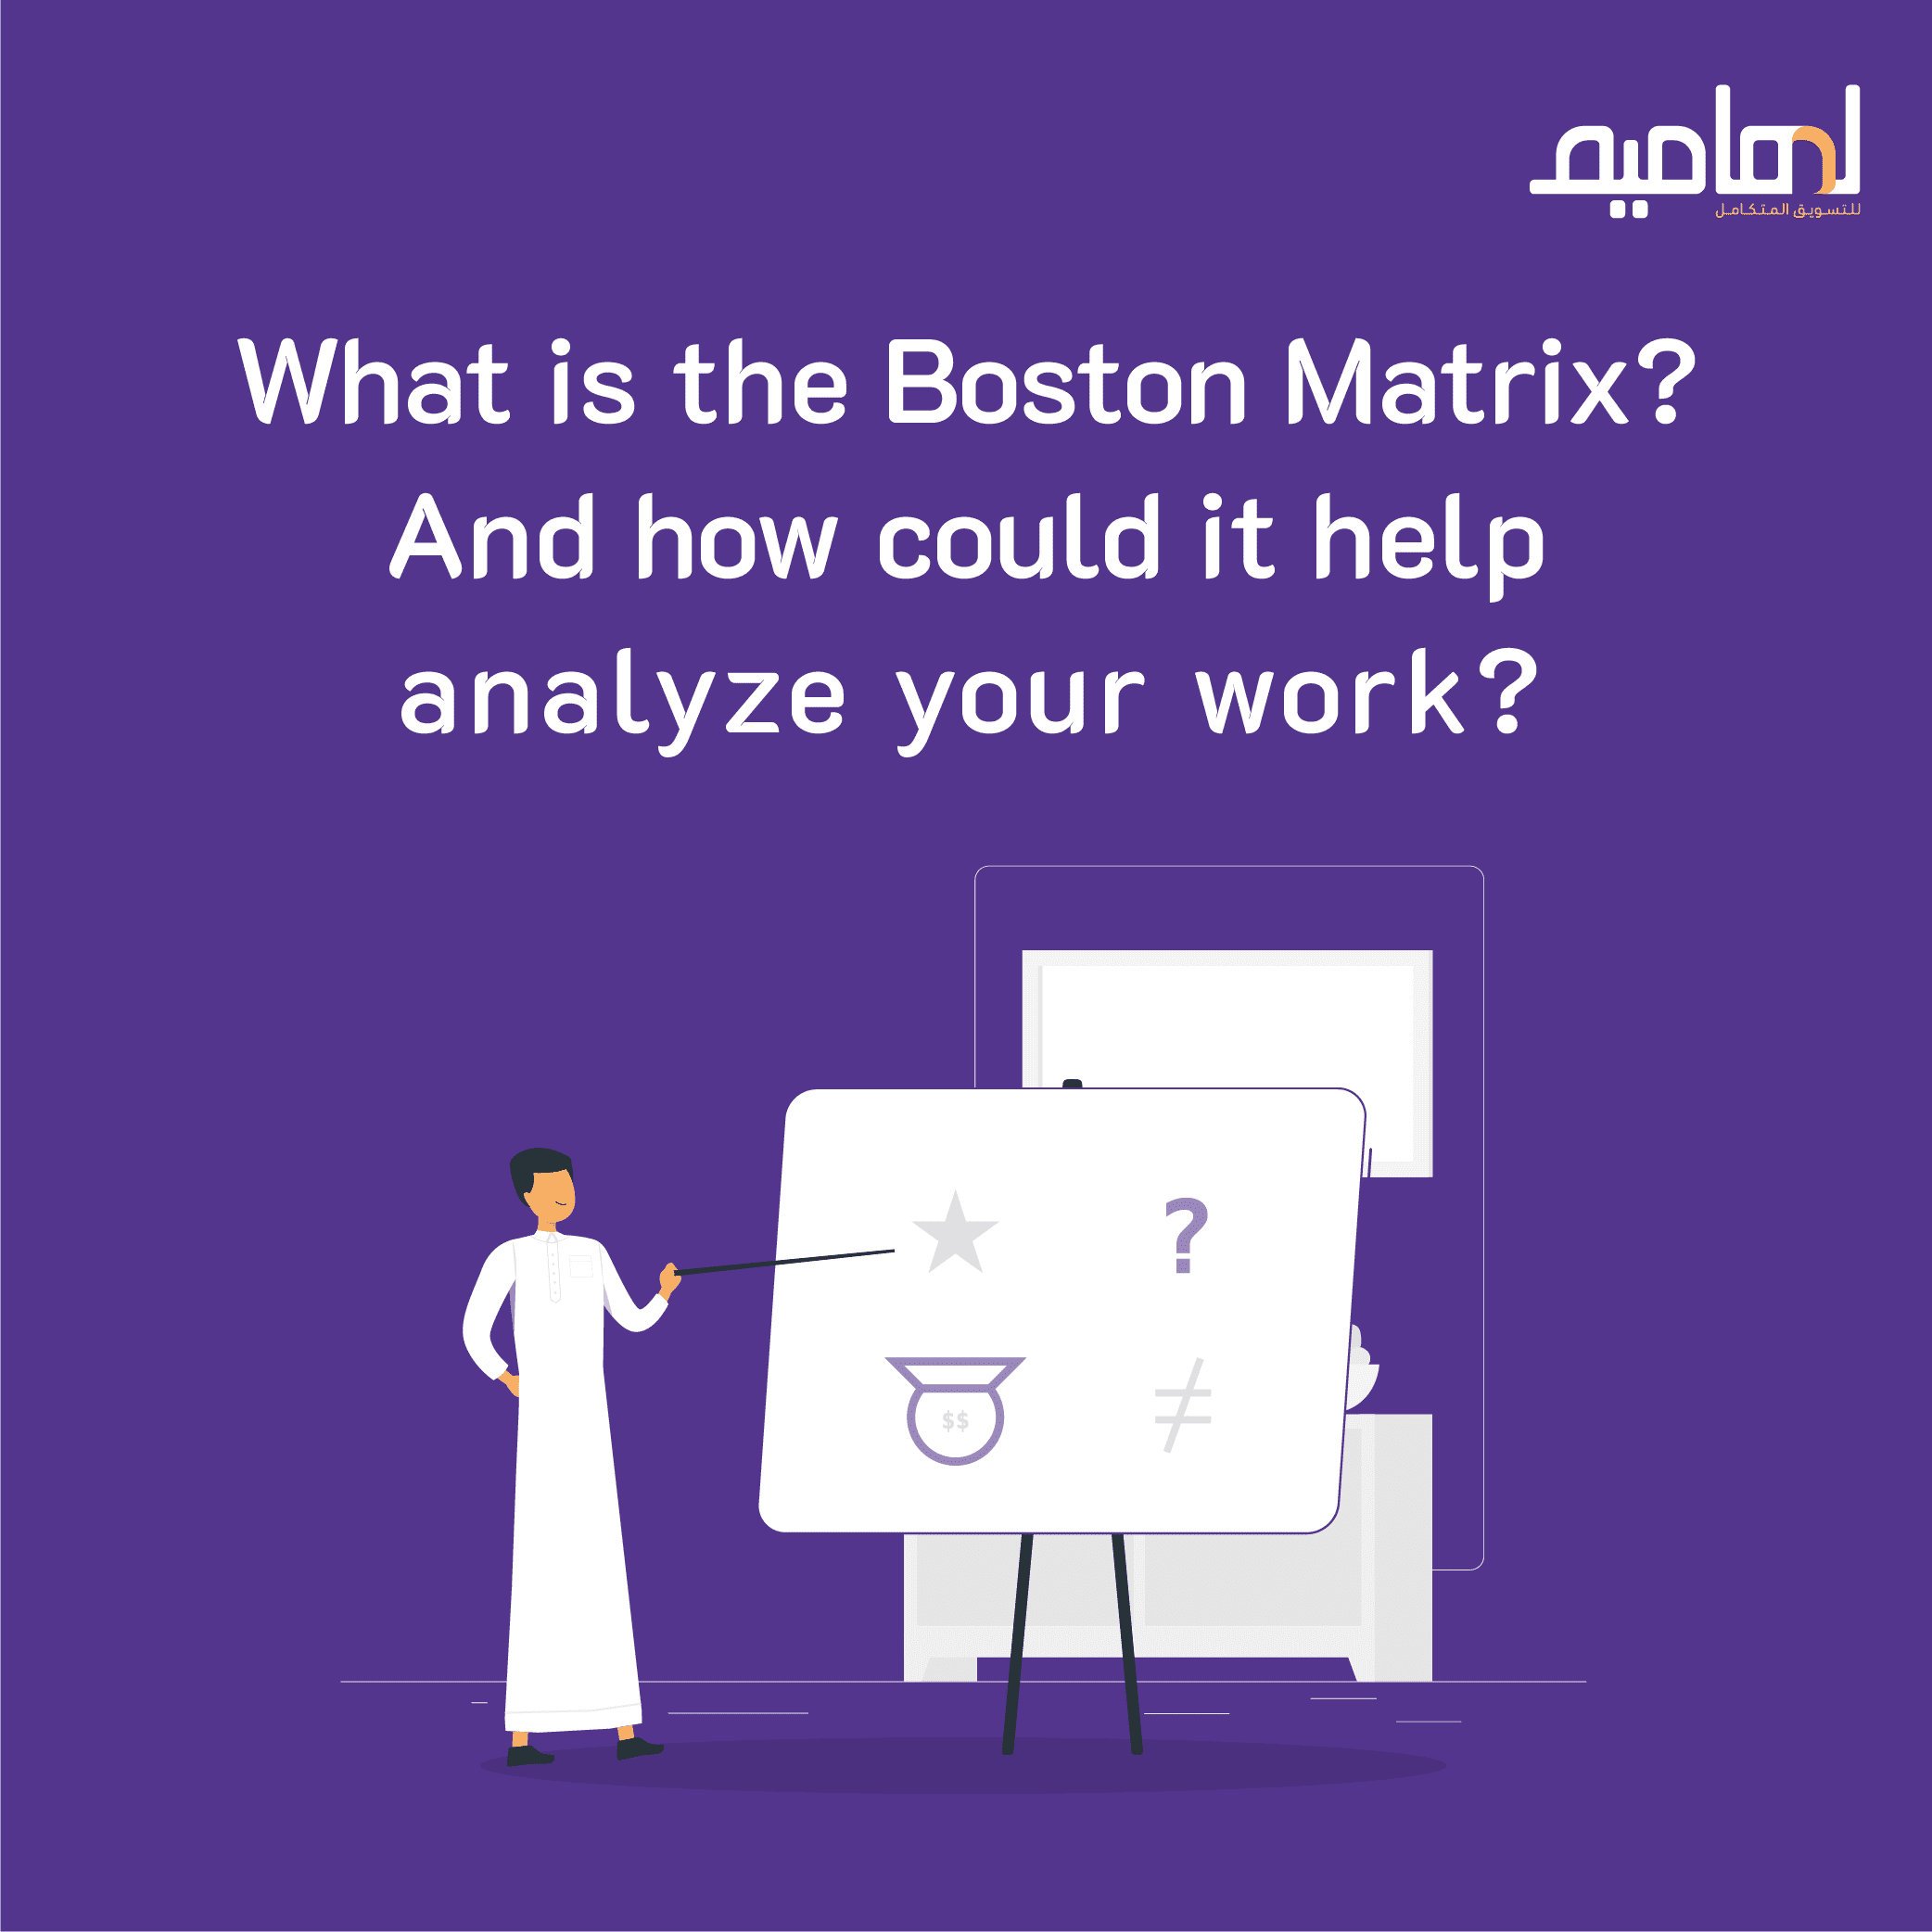 Boston Matrix, What is it? And how could it help analyze your work